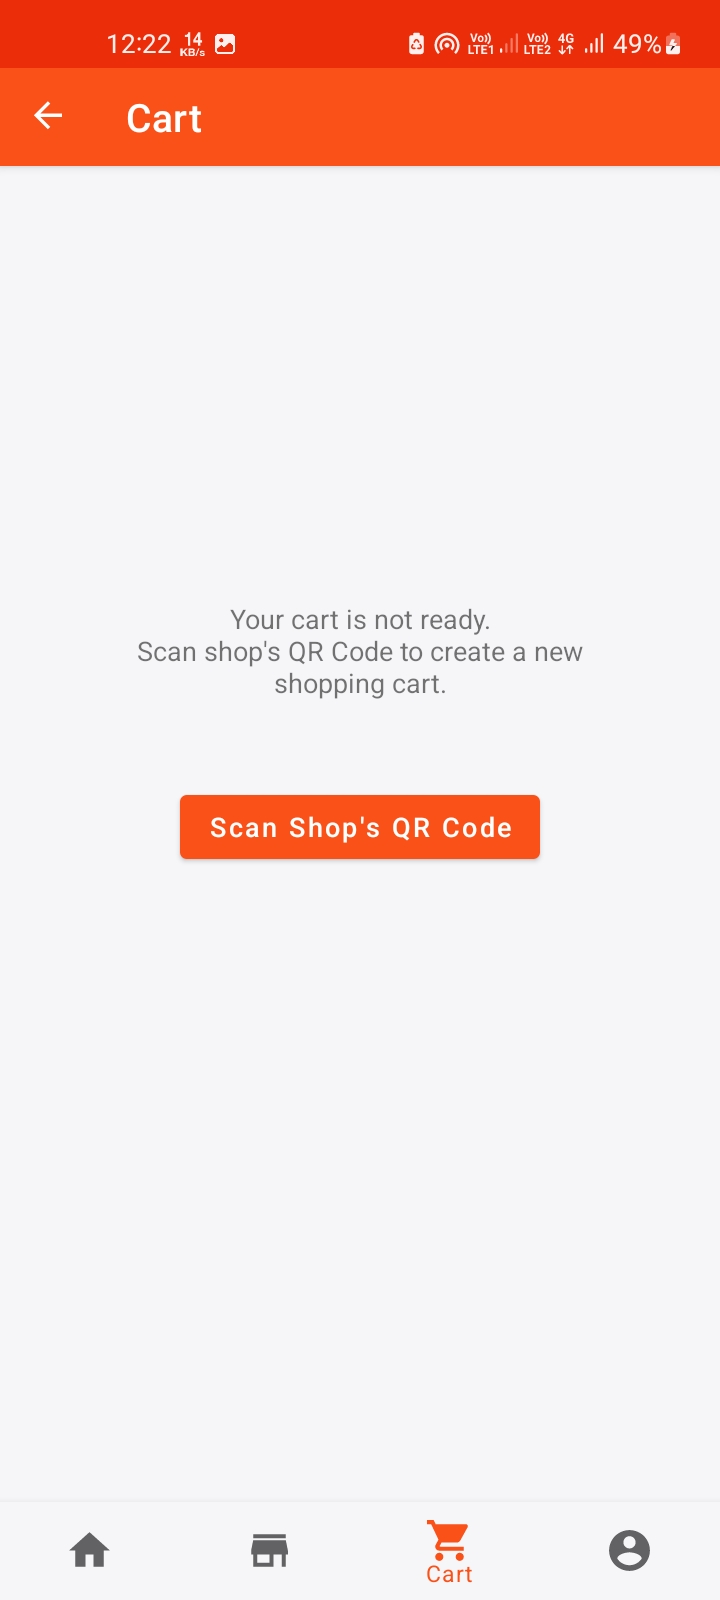 Start shopping by scanning Store's QR